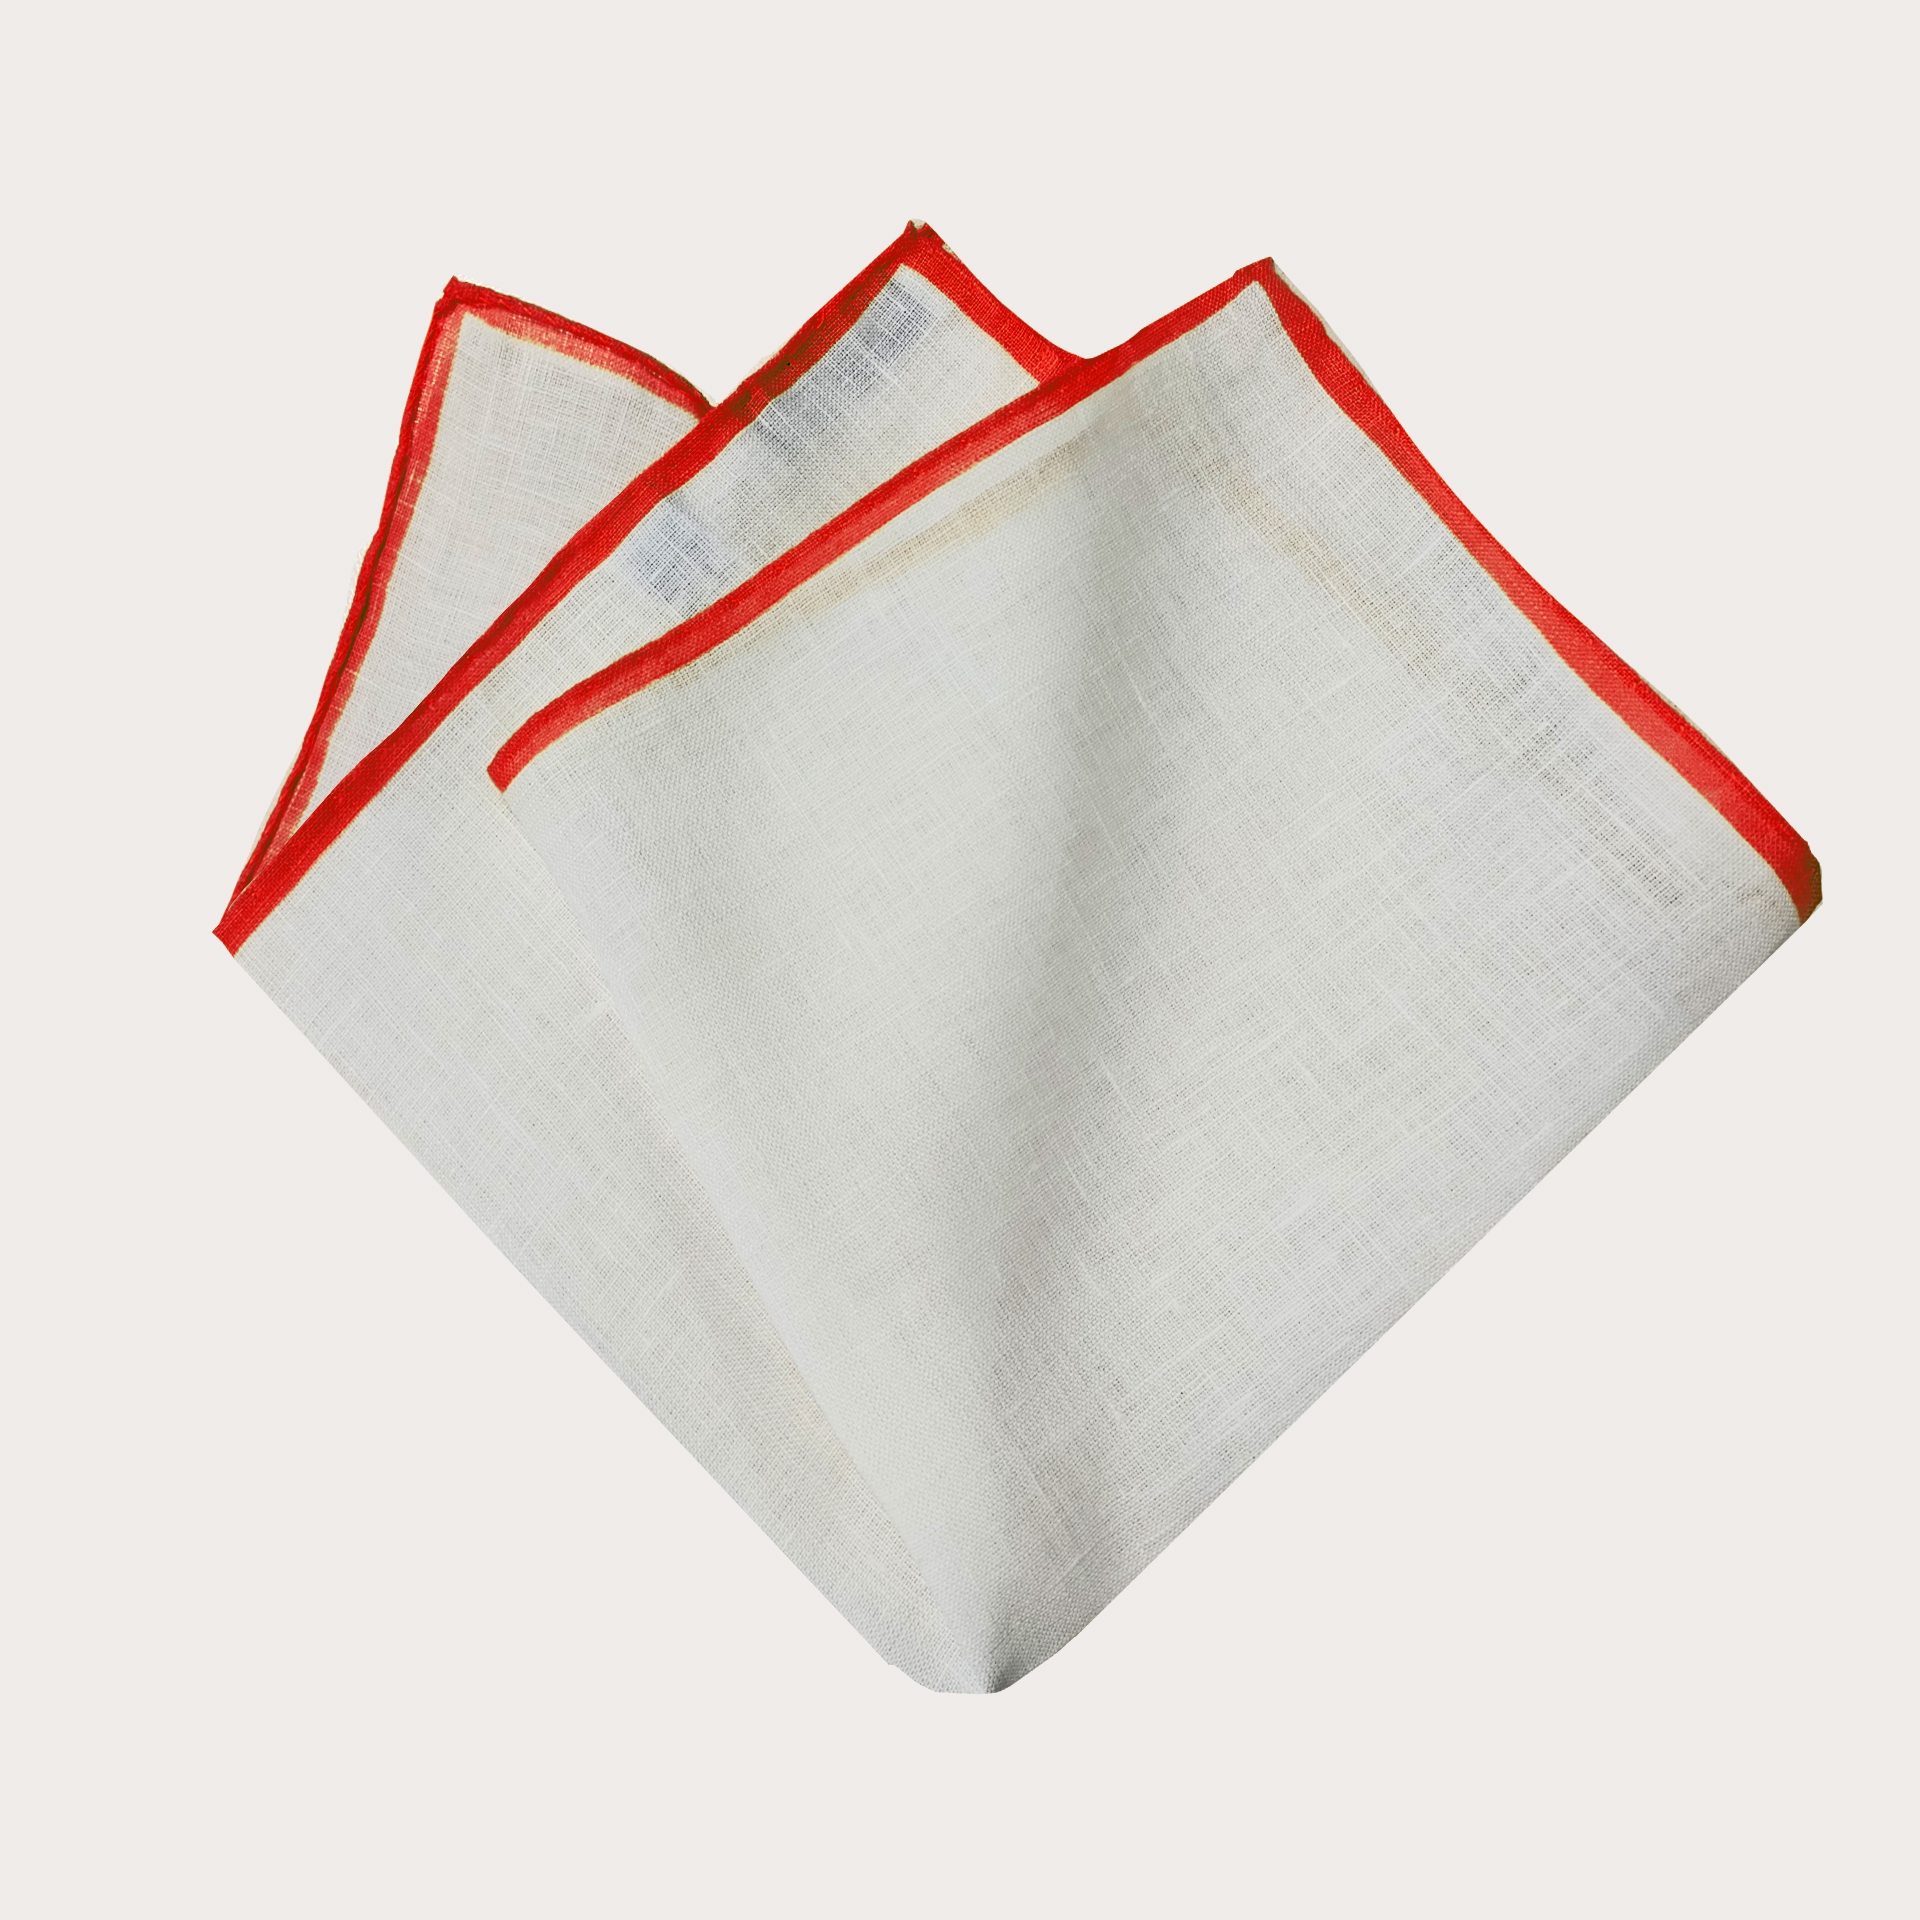 BRUCLE Pocket square in linen, white with red edges